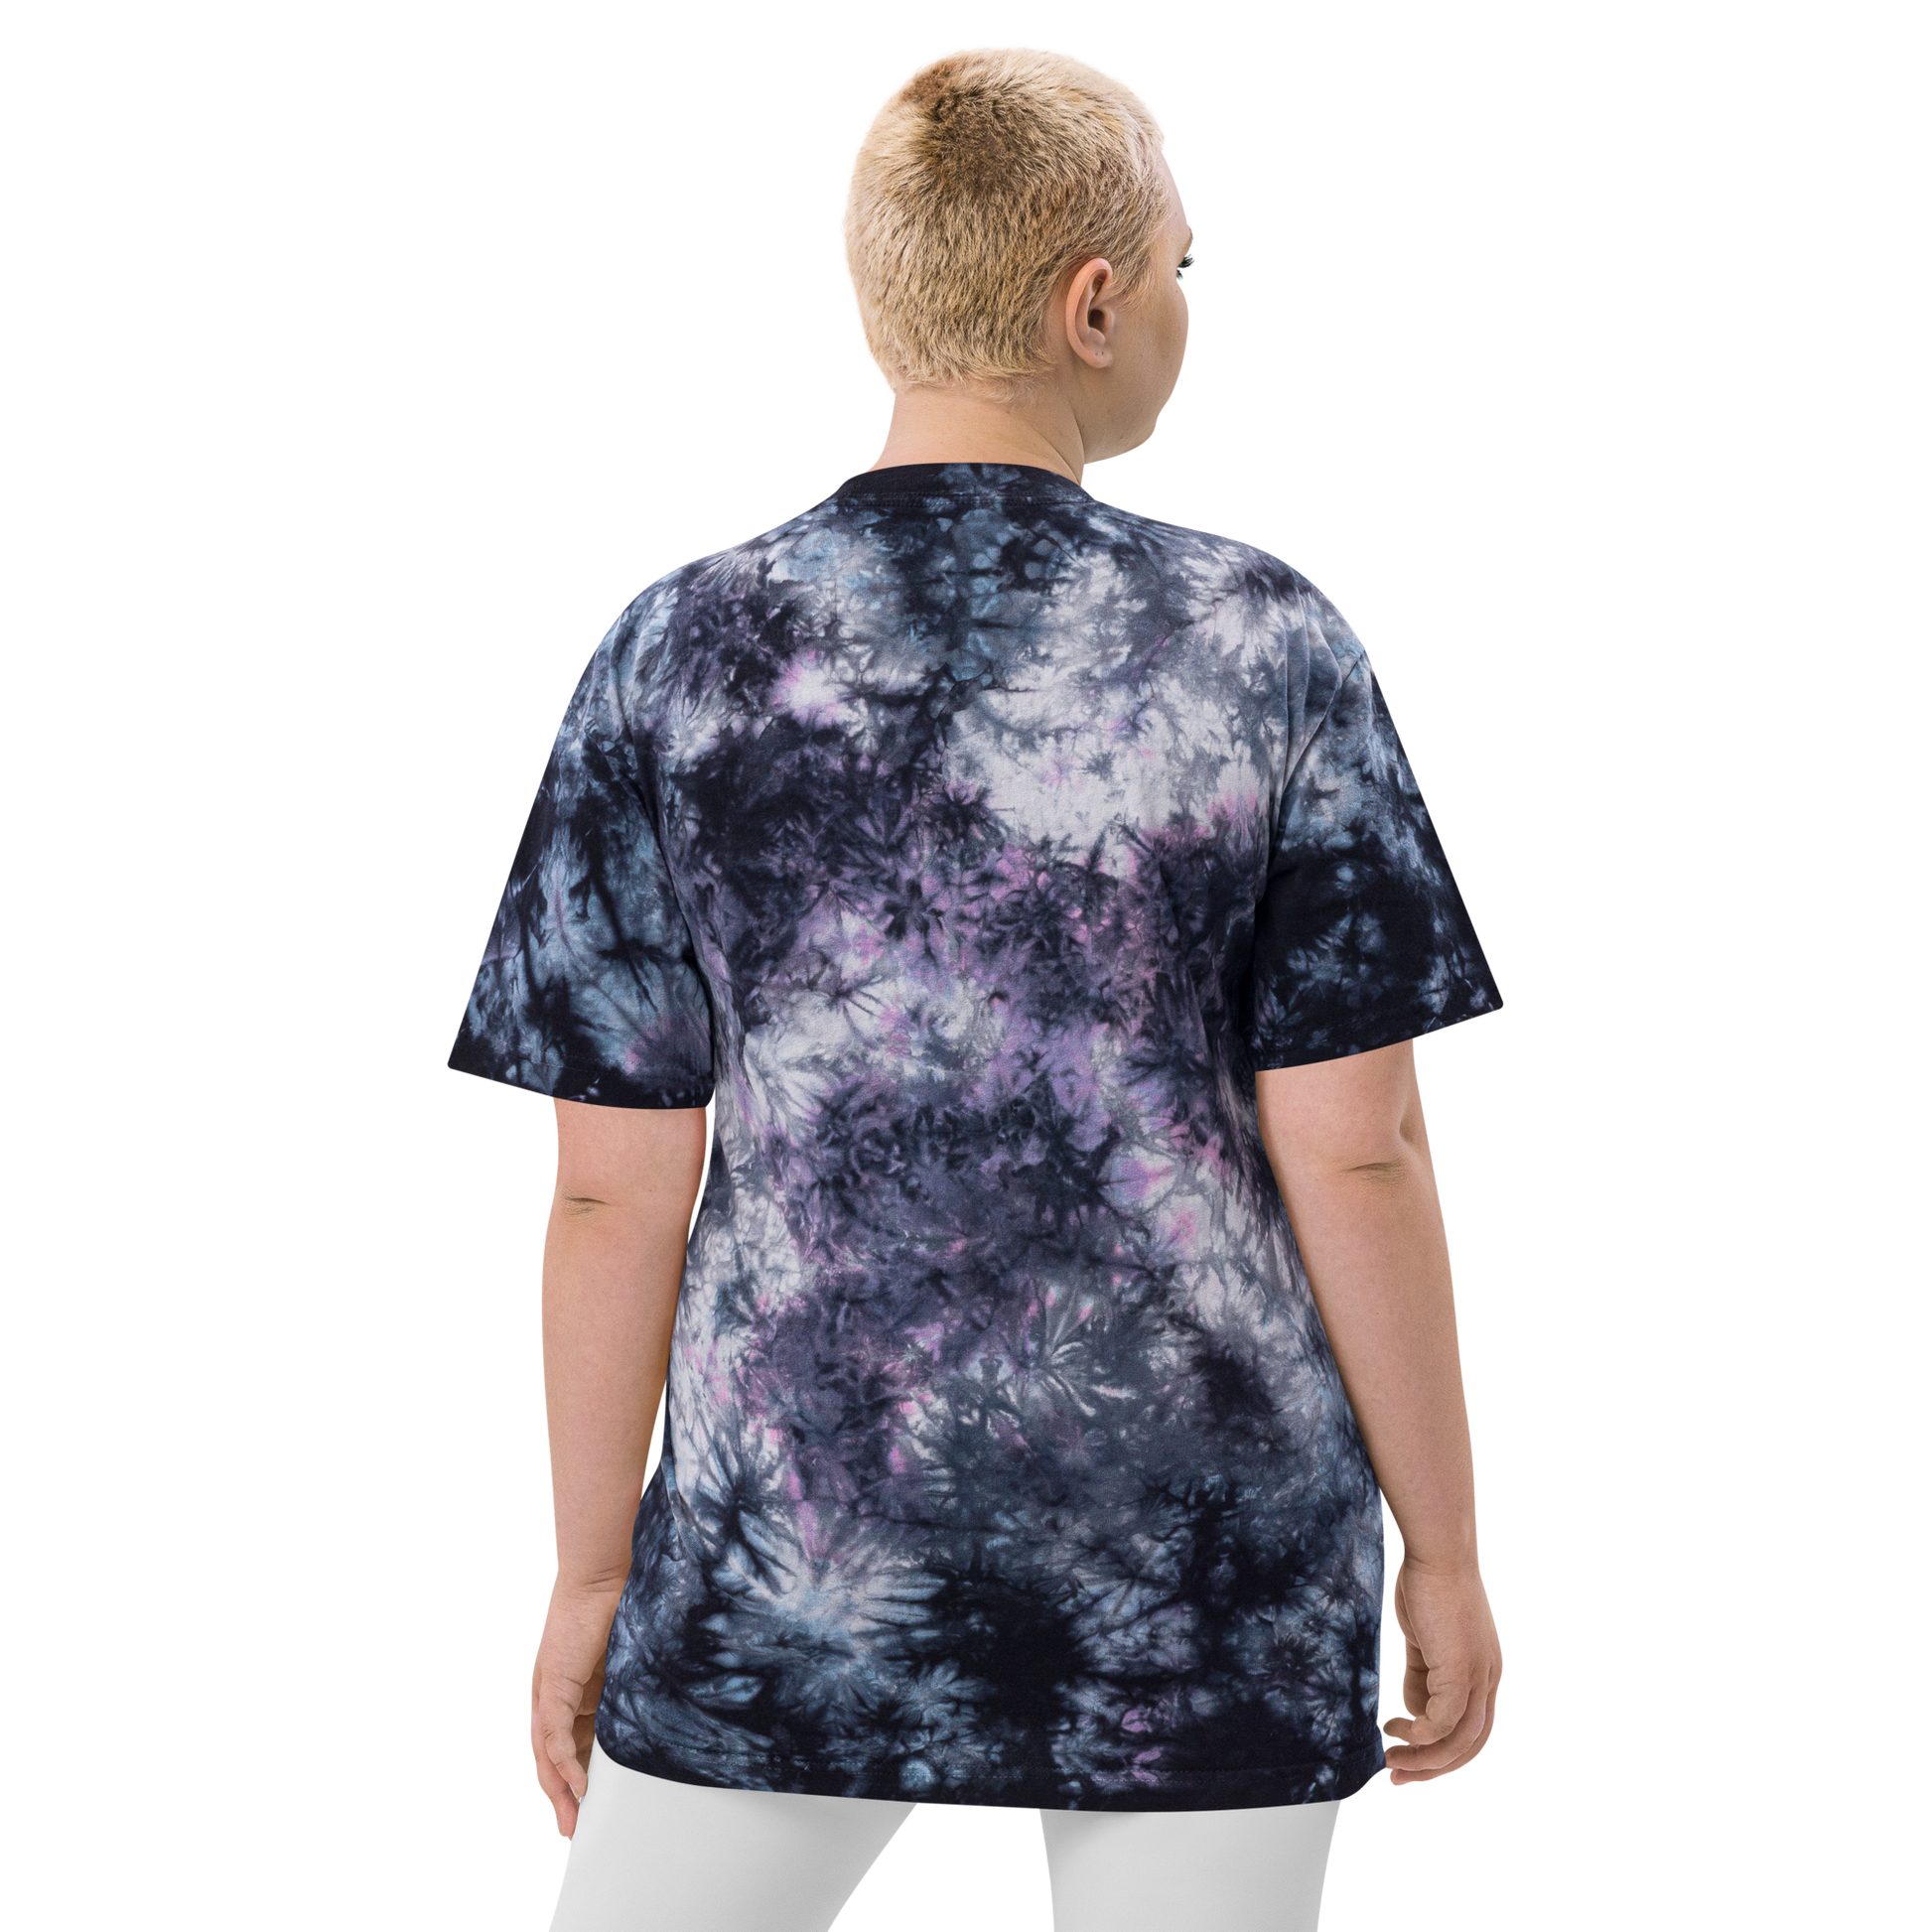 YHM Designs - YQT Thunder Bay Oversized Tie-Dye T-Shirt - Crossed-X Design with Airport Code and Vintage Propliner - White Embroidery - Image 06